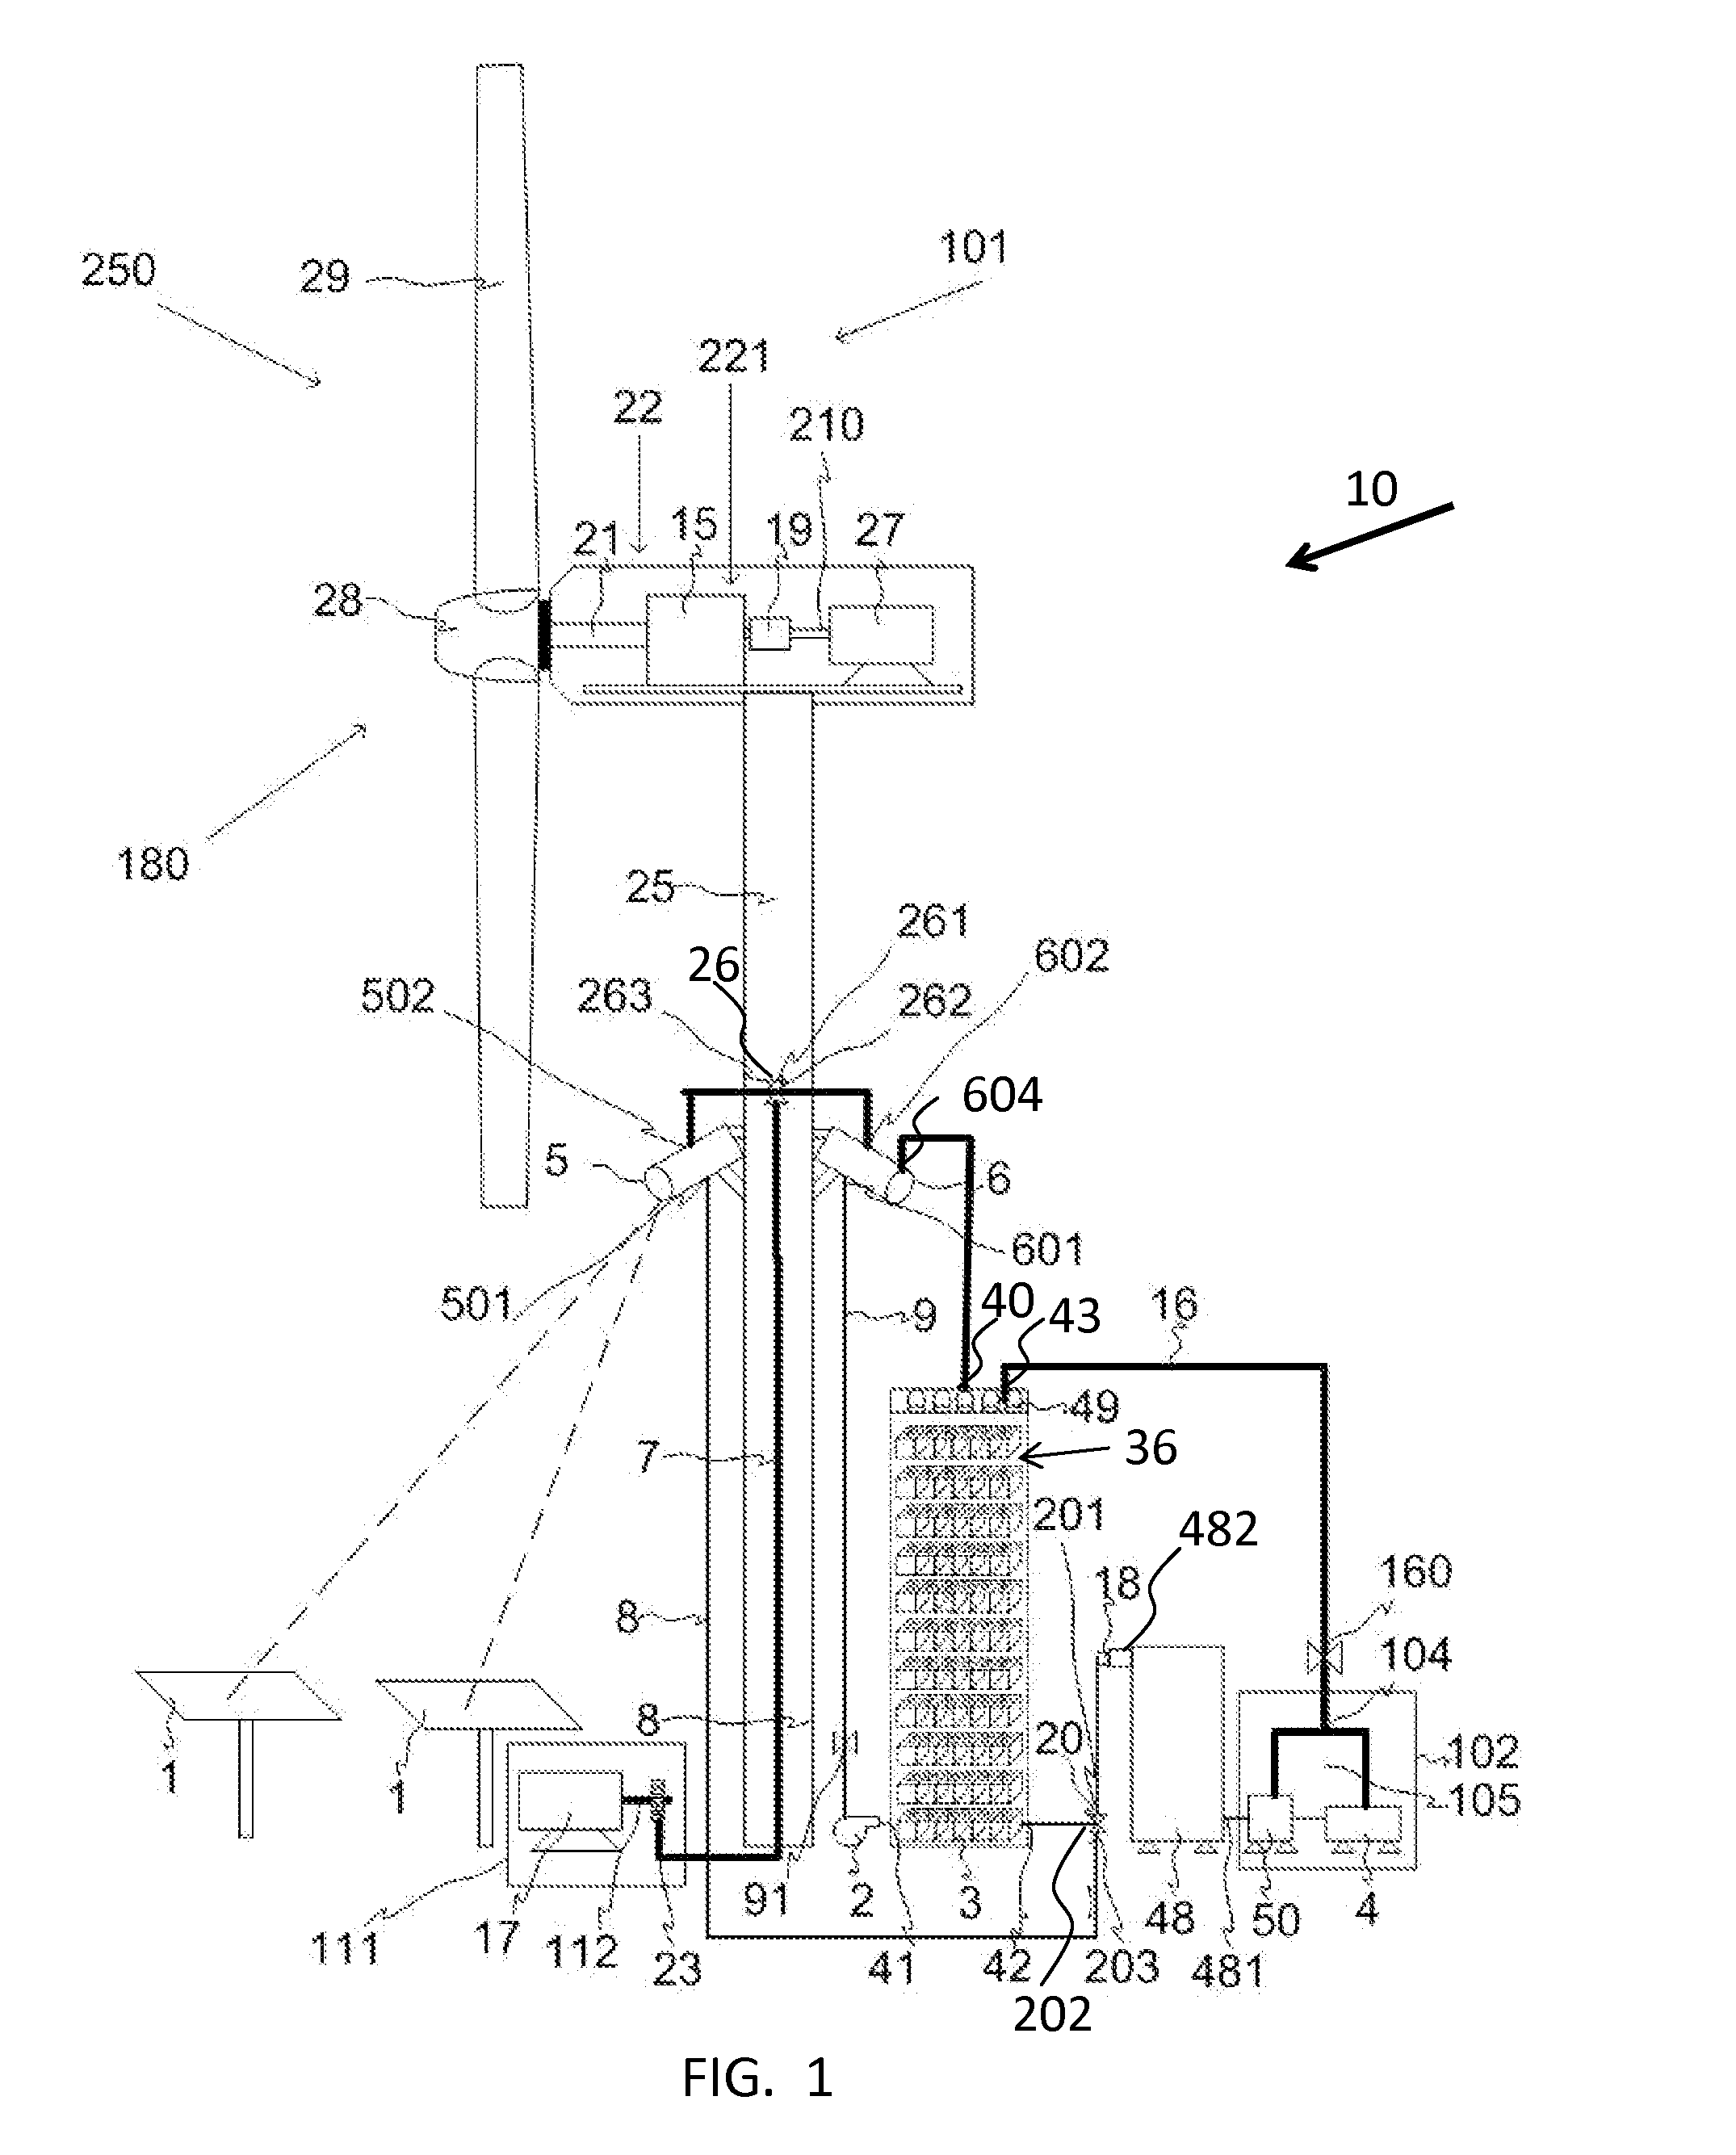 Hybrid system for electric power generation from solar-thermal energy and wind energy sources